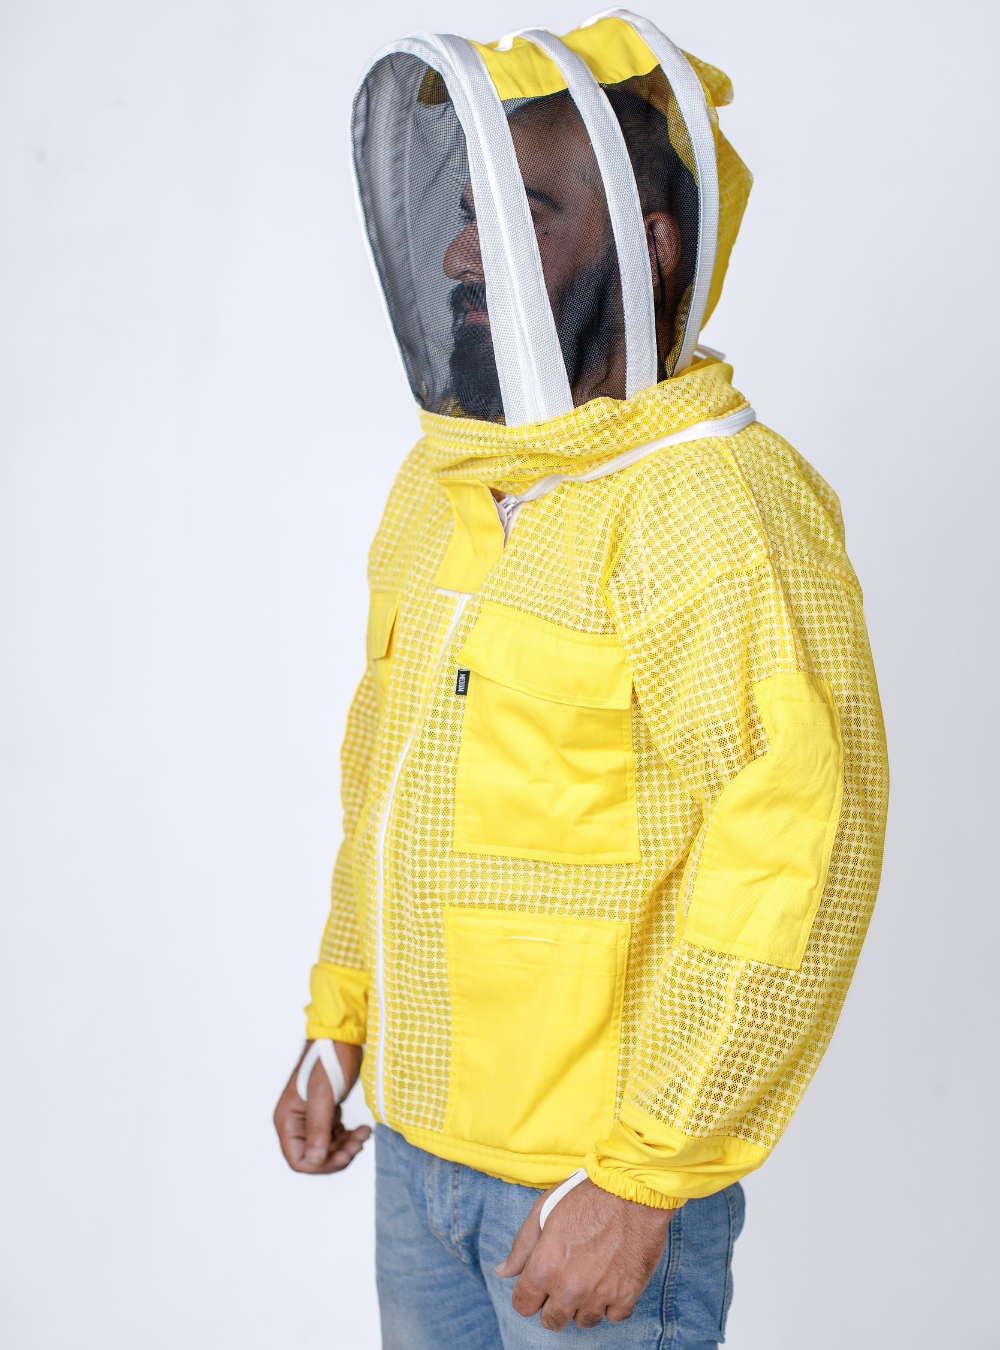 A side profile of Yellow Beekeeping Ventilated Jacket incorporating a Fencing Vail, multiple pockets, and double-stitched construction for durability.